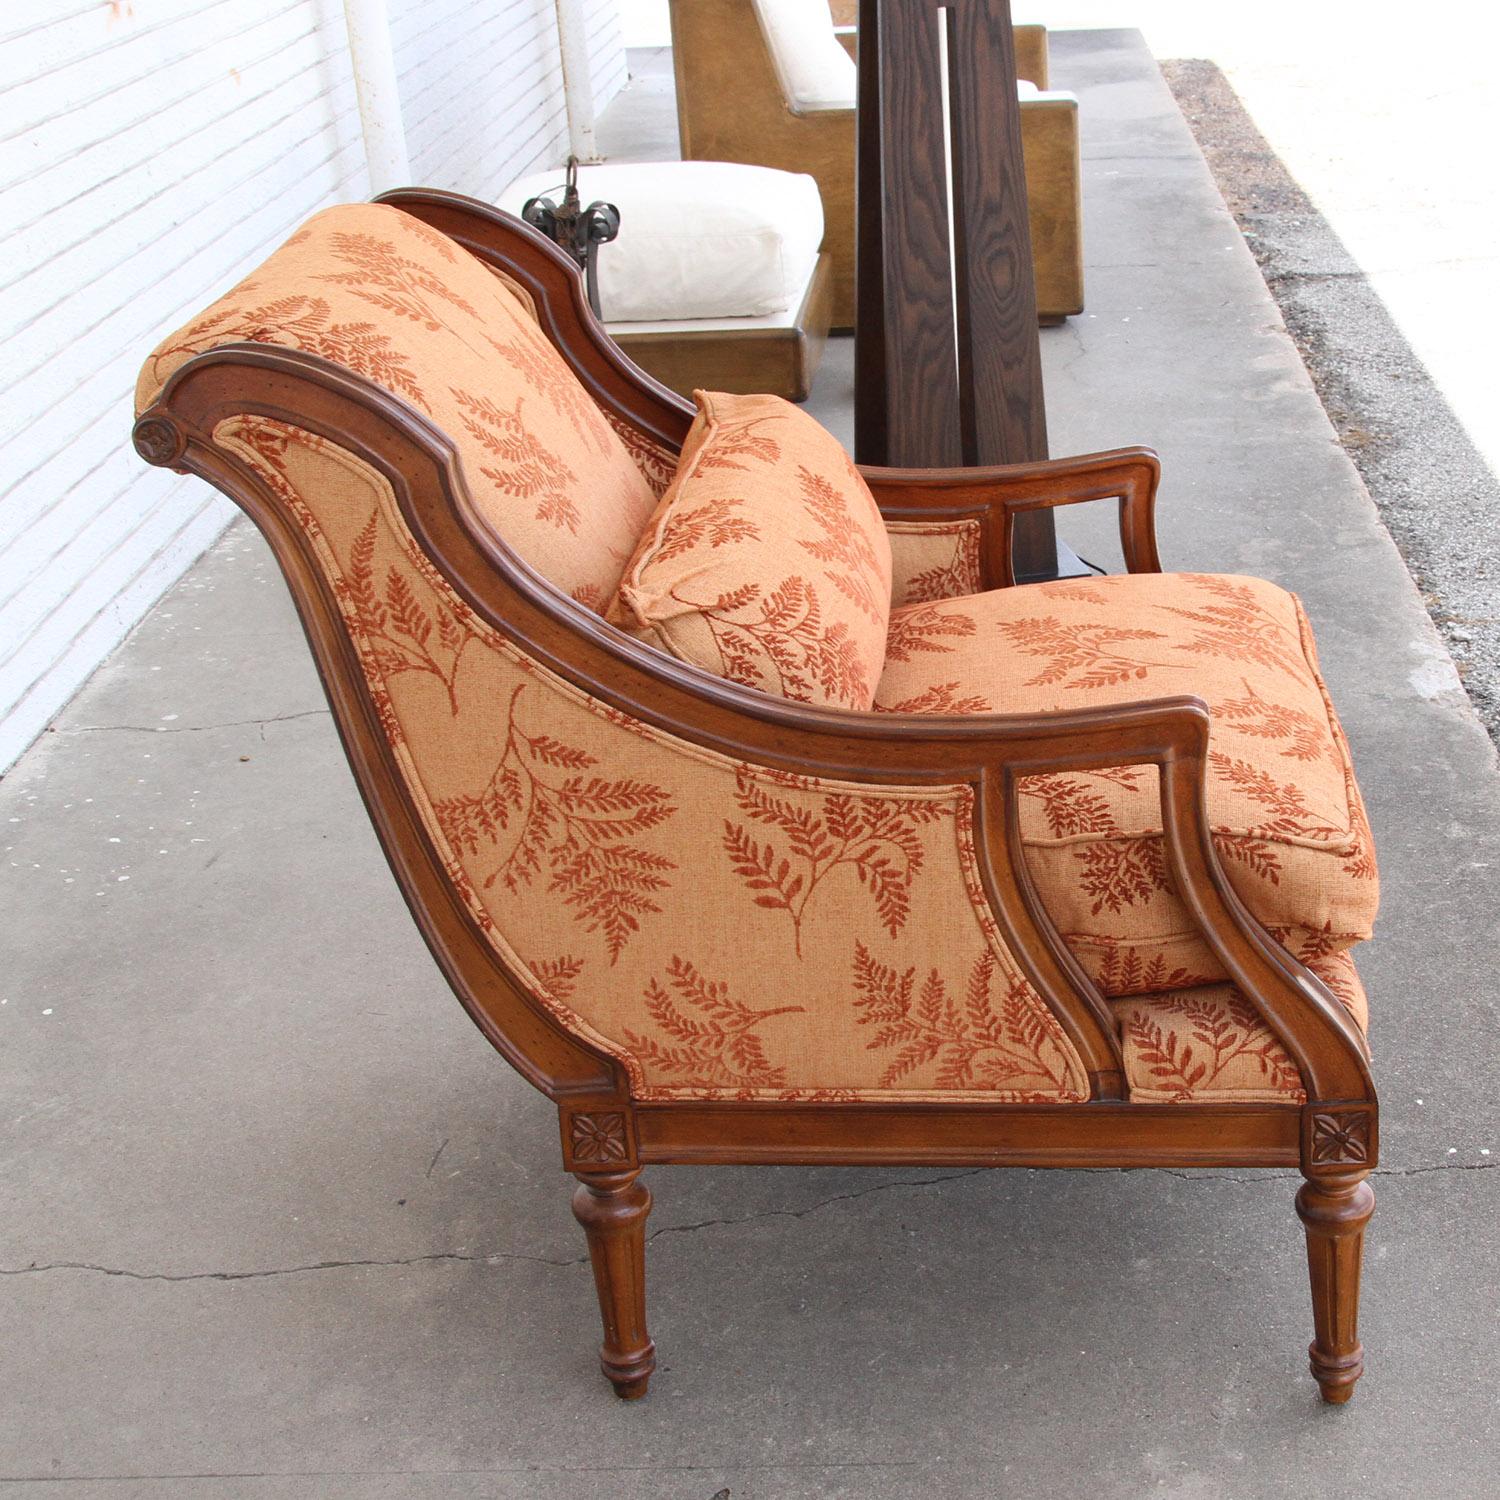 20th century French Empire style carved wood lounge chair

Rich upholstery compliments the beautiful curves of this Henredon chair.